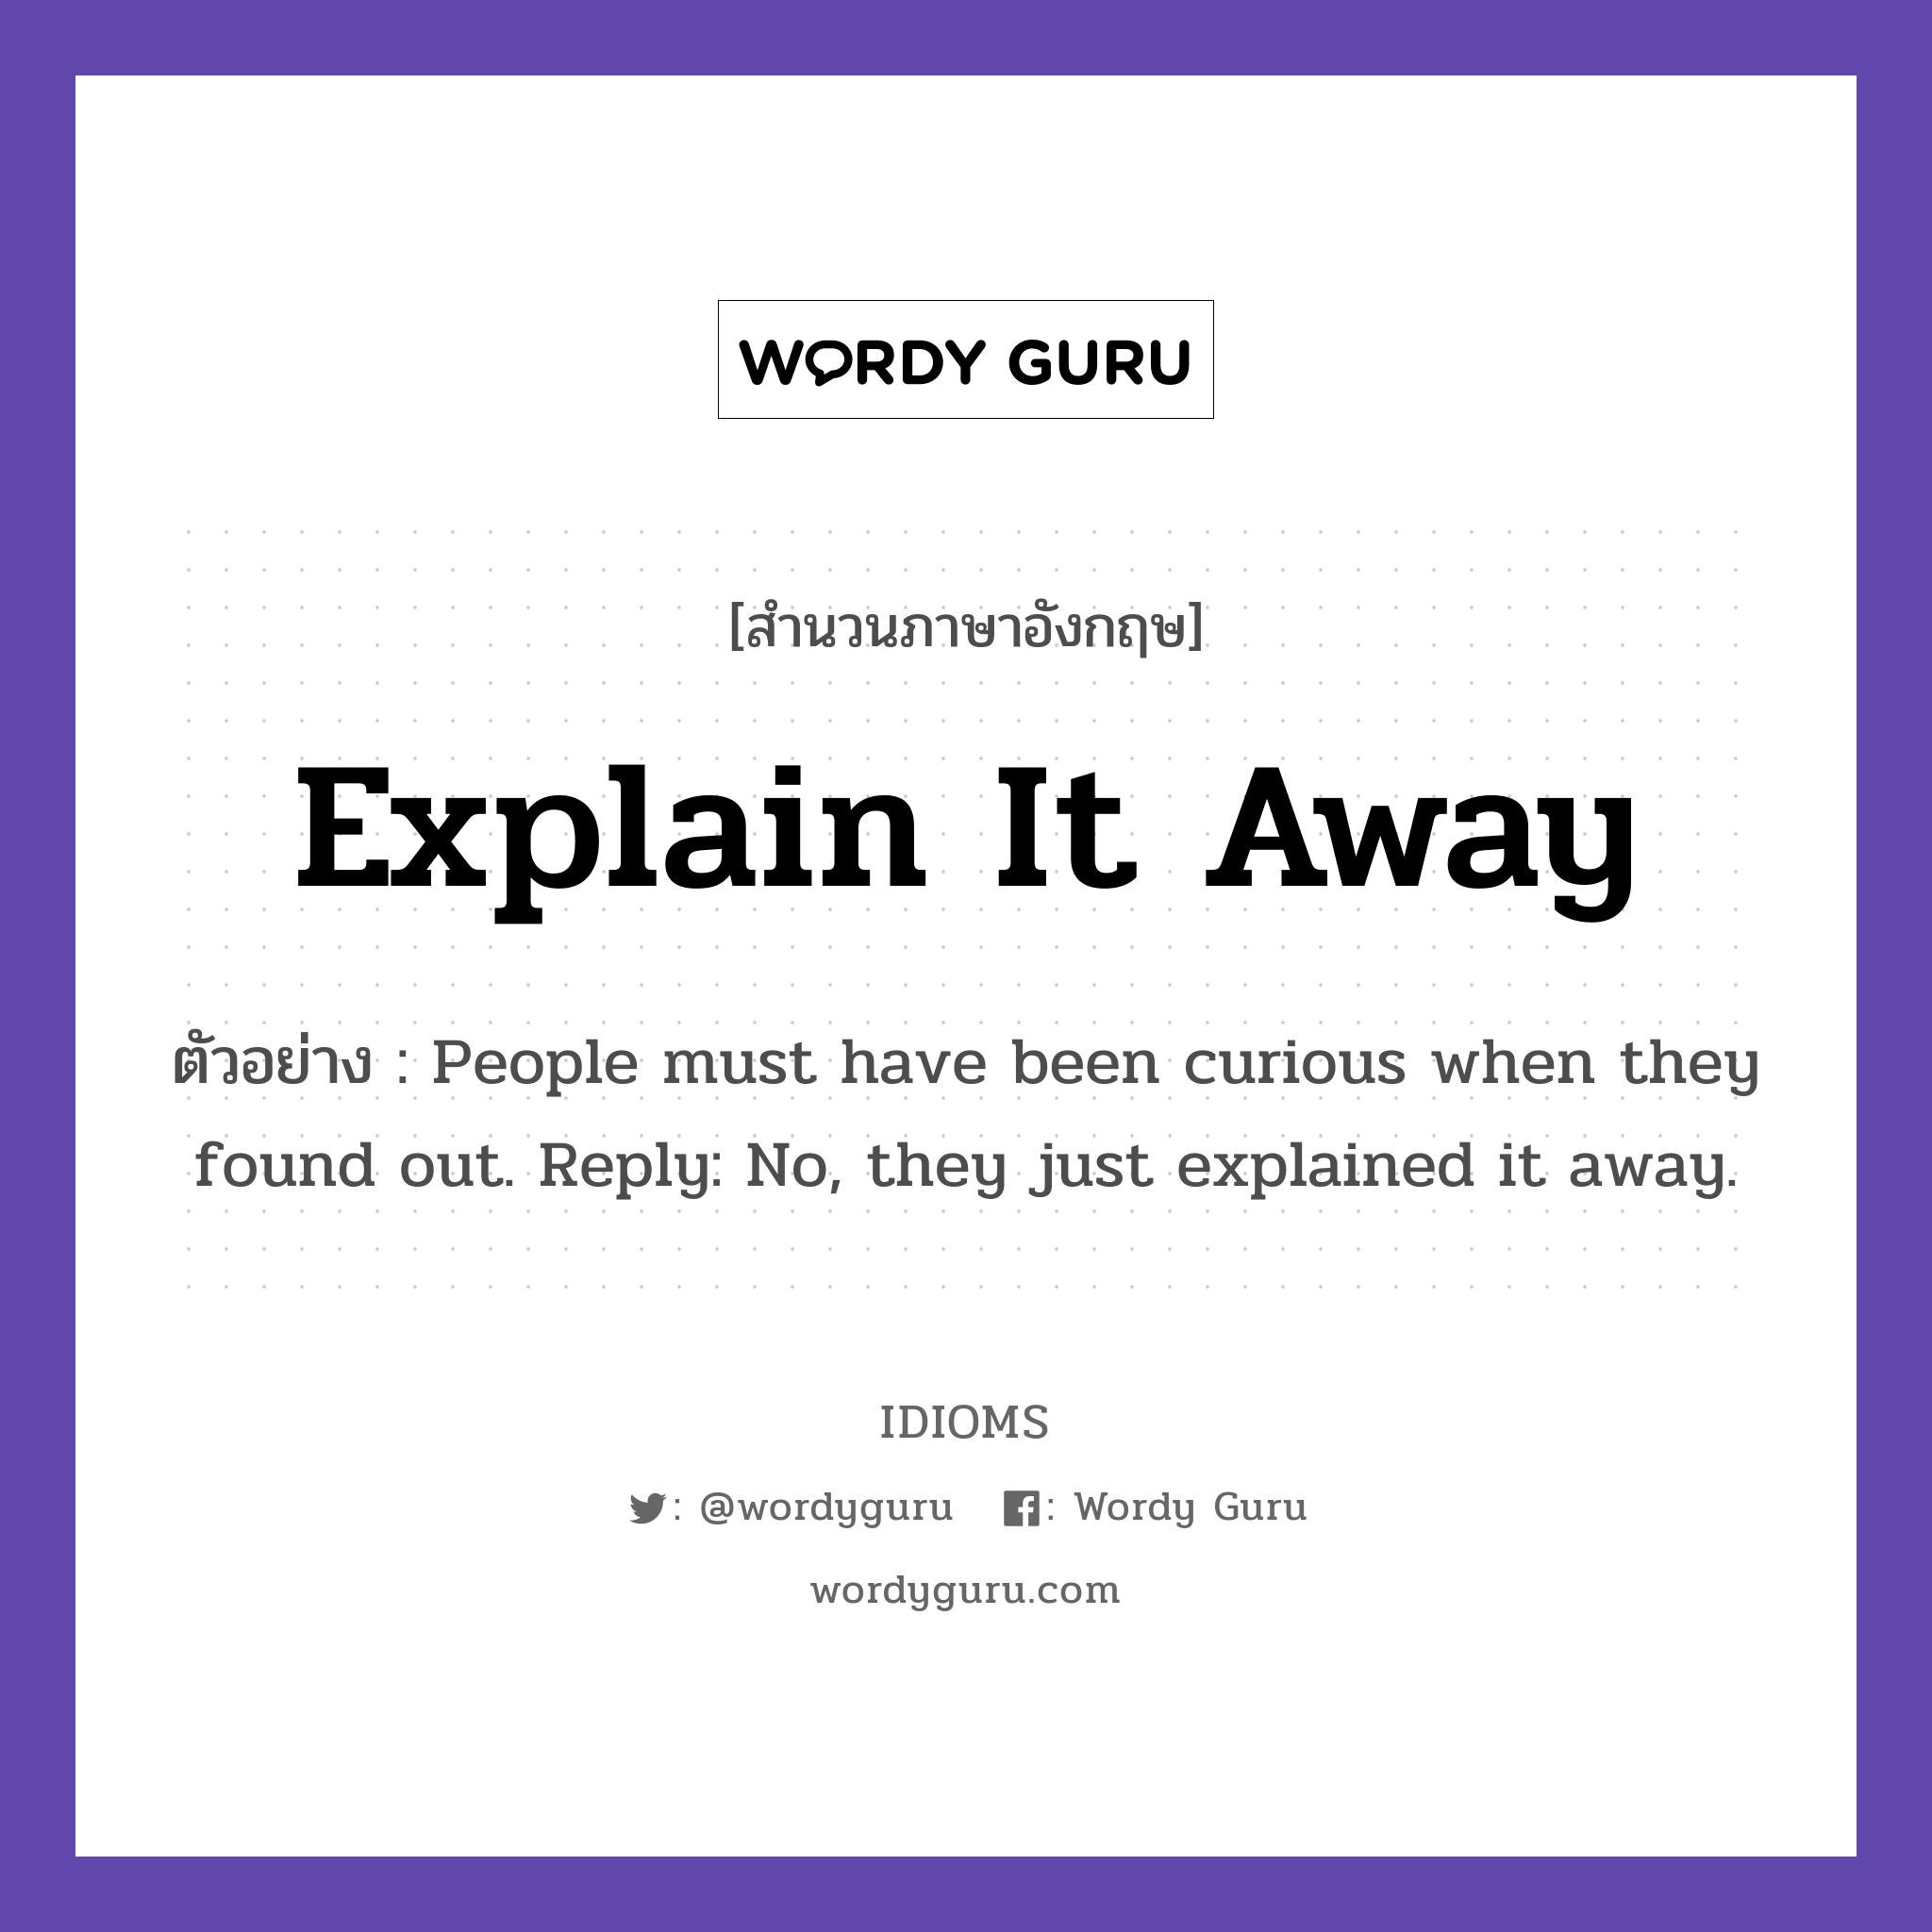 Explain It Away แปลว่า?, สำนวนภาษาอังกฤษ Explain It Away ตัวอย่าง People must have been curious when they found out. Reply: No, they just explained it away.